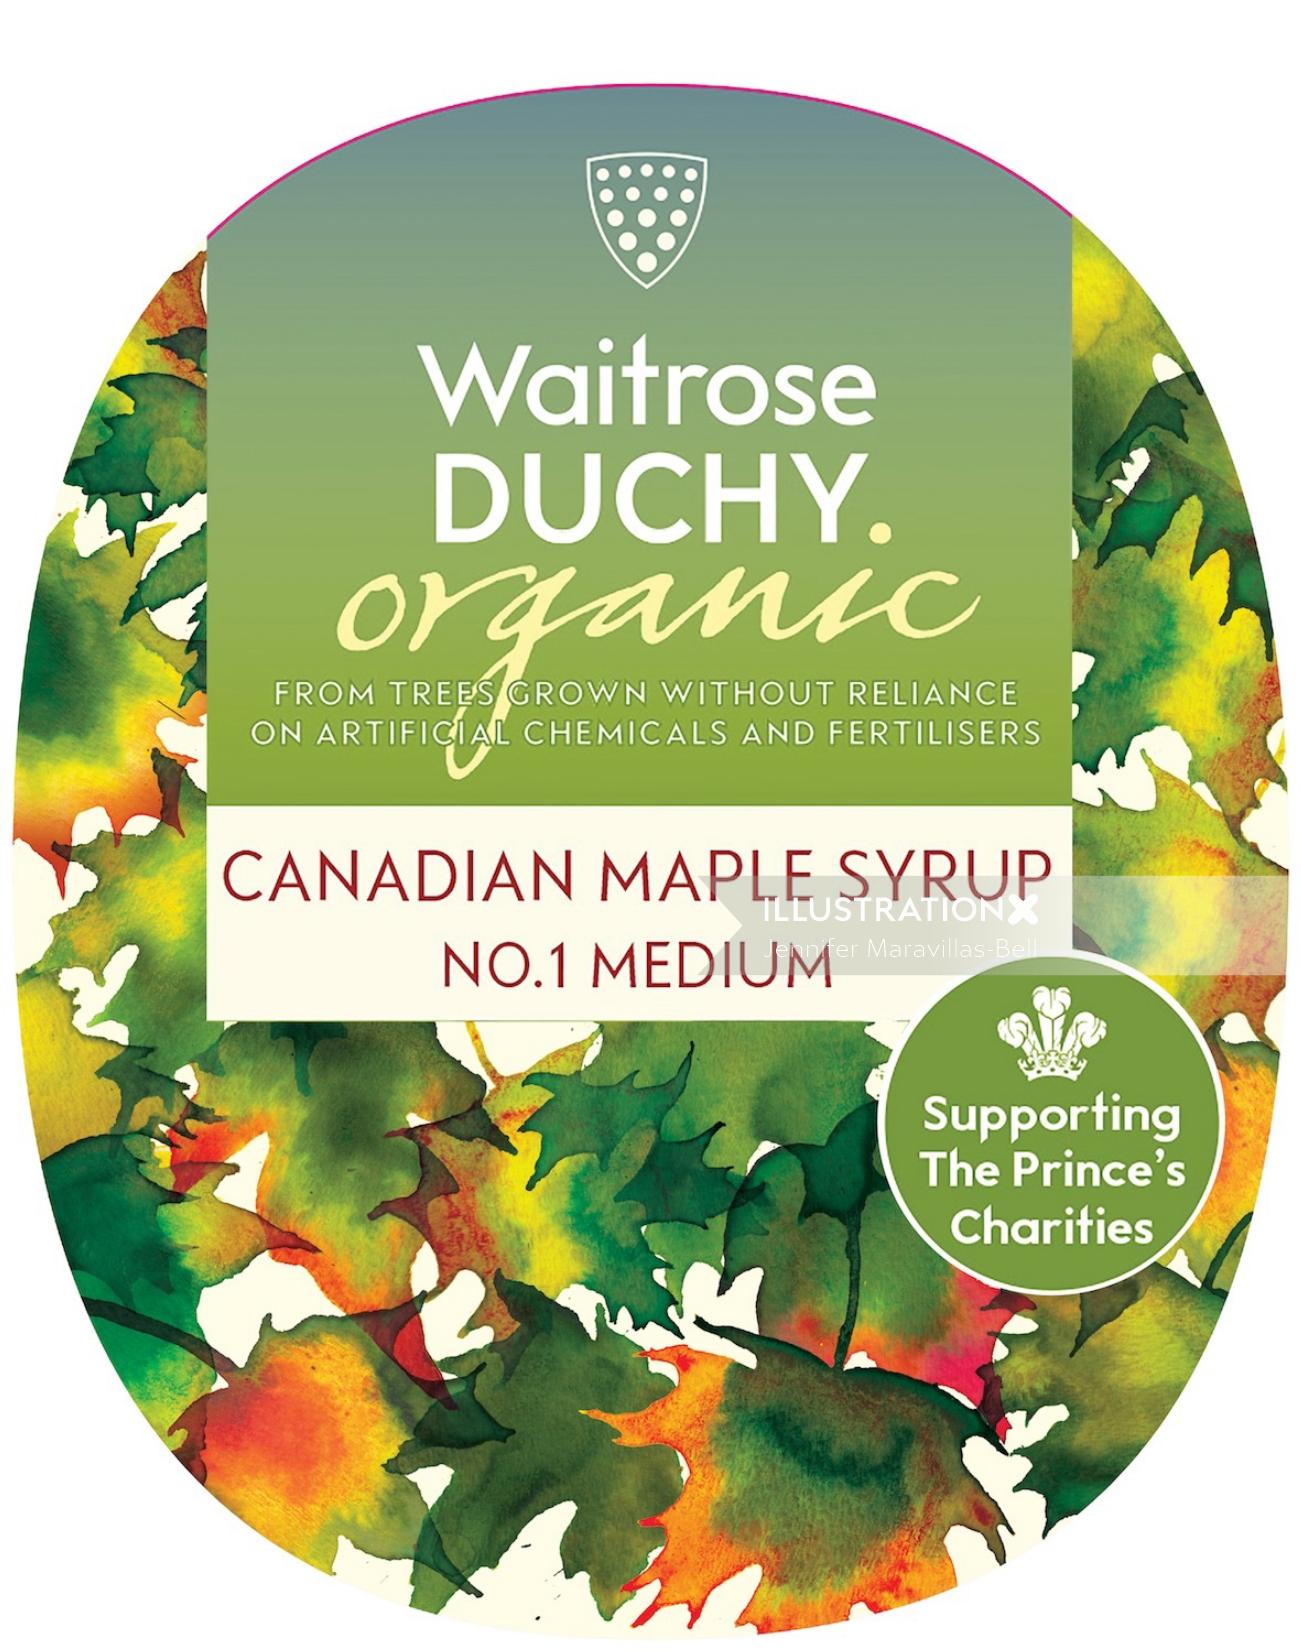 An illustration for Waitrose Duchy Canadian maple syrup